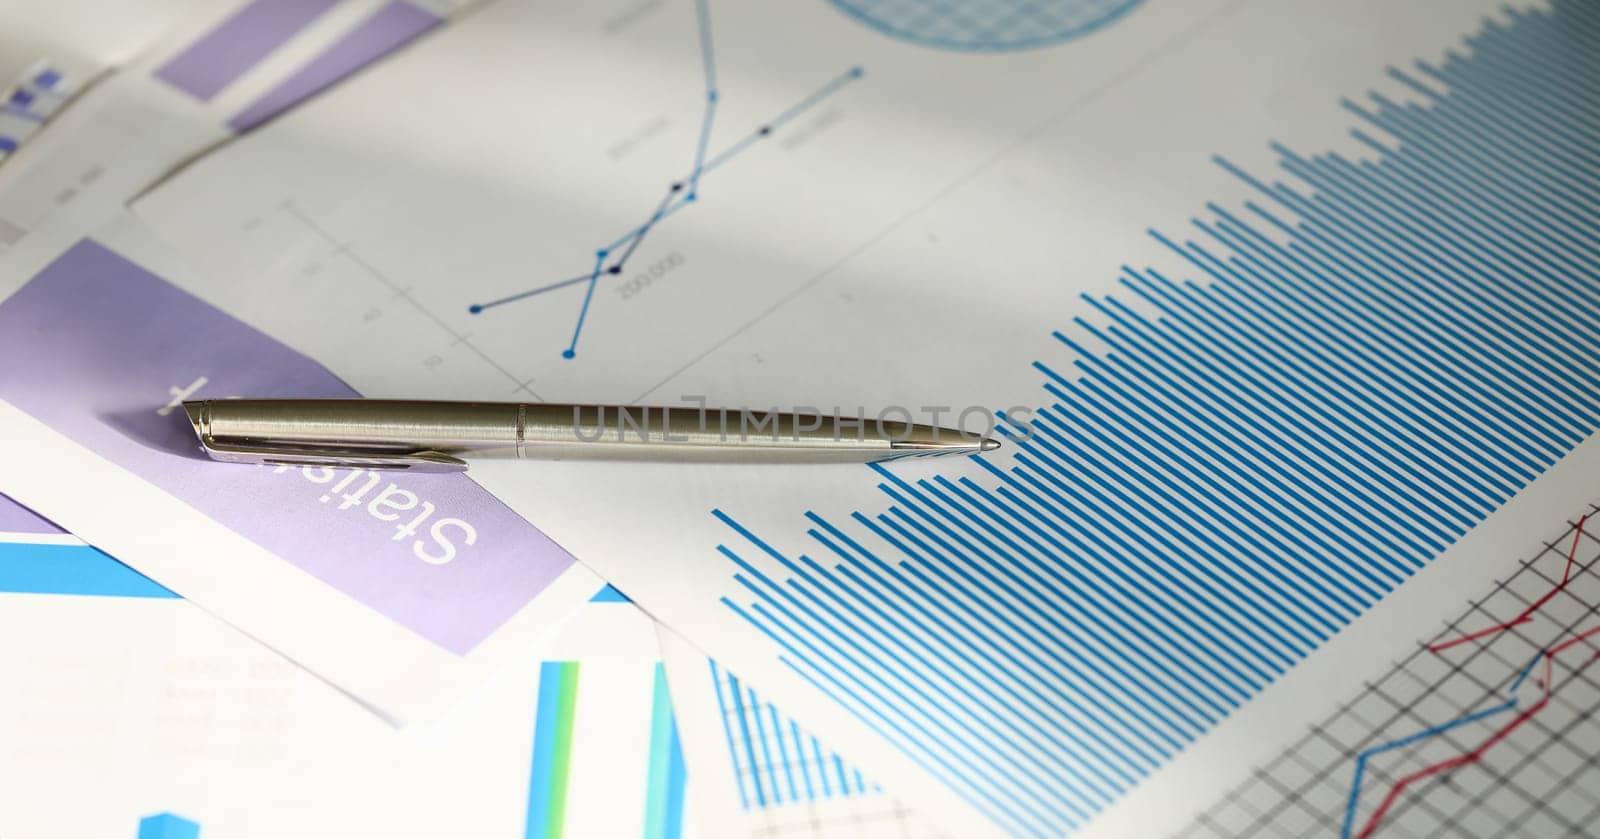 Close-up of analysis graphics on table with silver pen. Important documentation with colourful charts and graphs. Finance report accounting statistics business concept